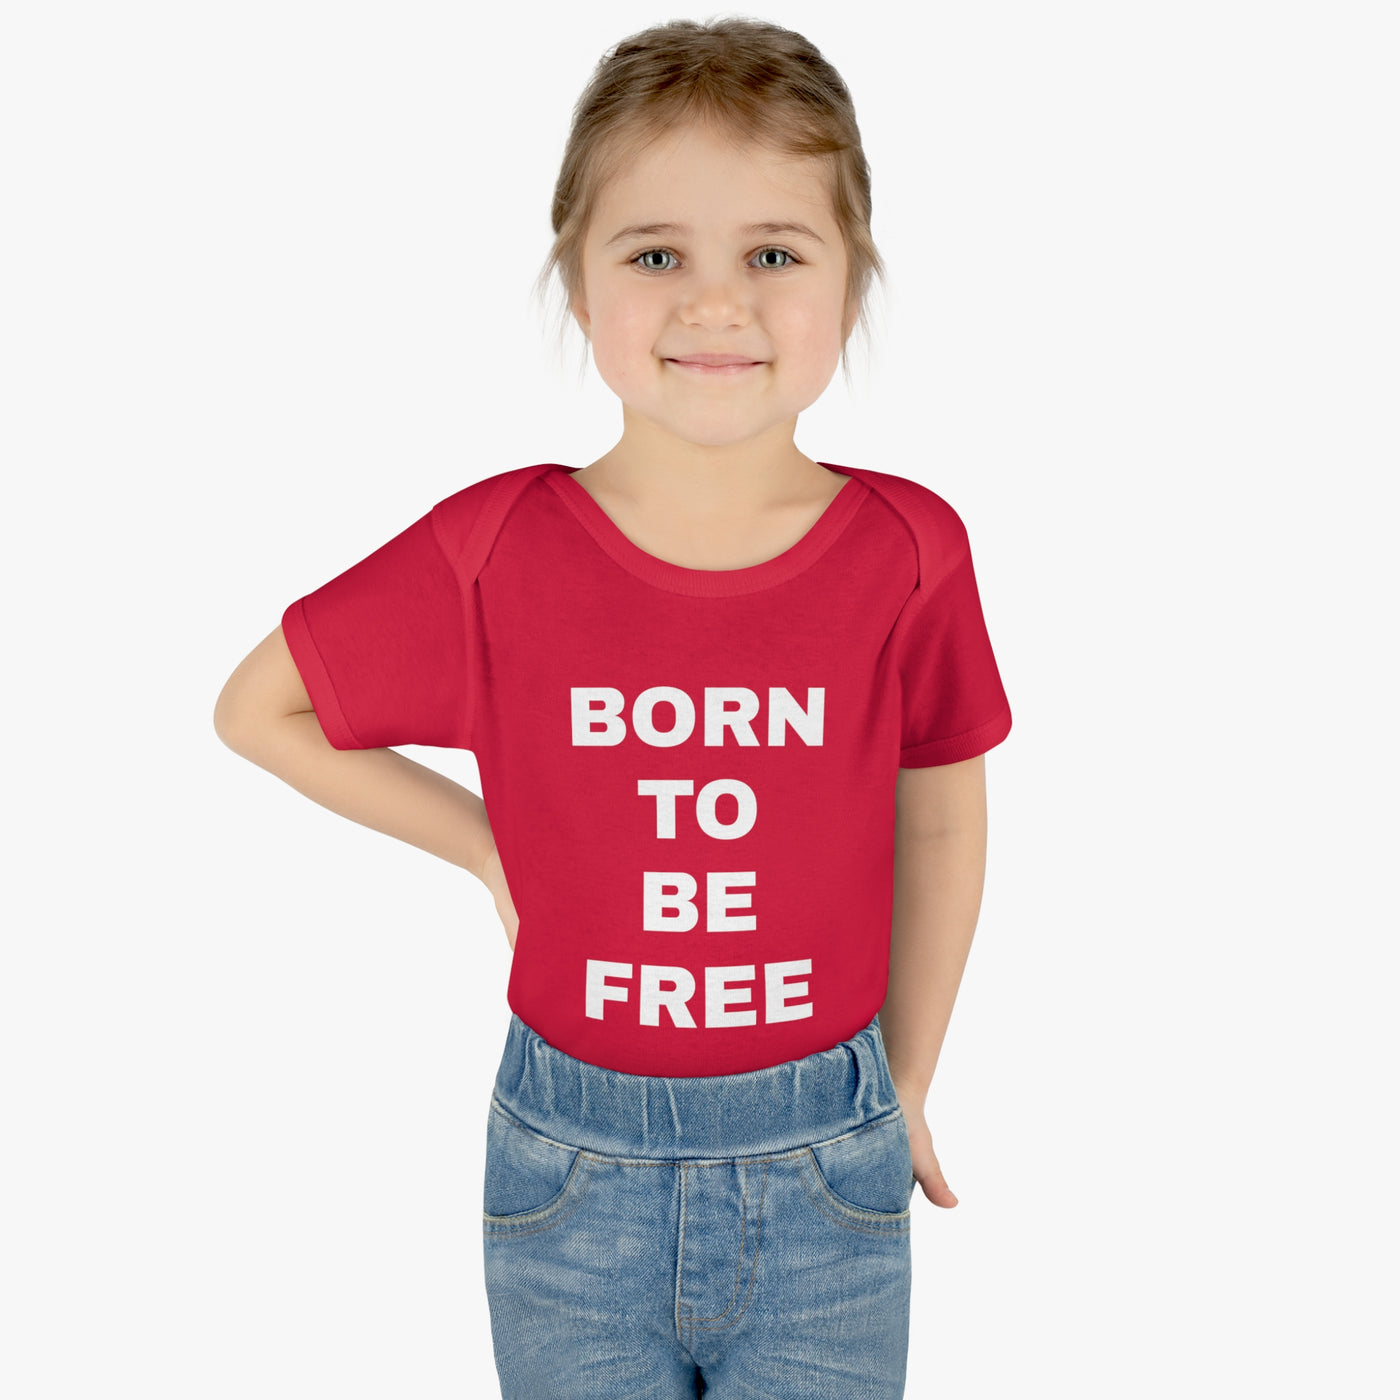 BORN TO BE FREE | PATRIOTIC KIDS SHIRT - Freedom First Supply